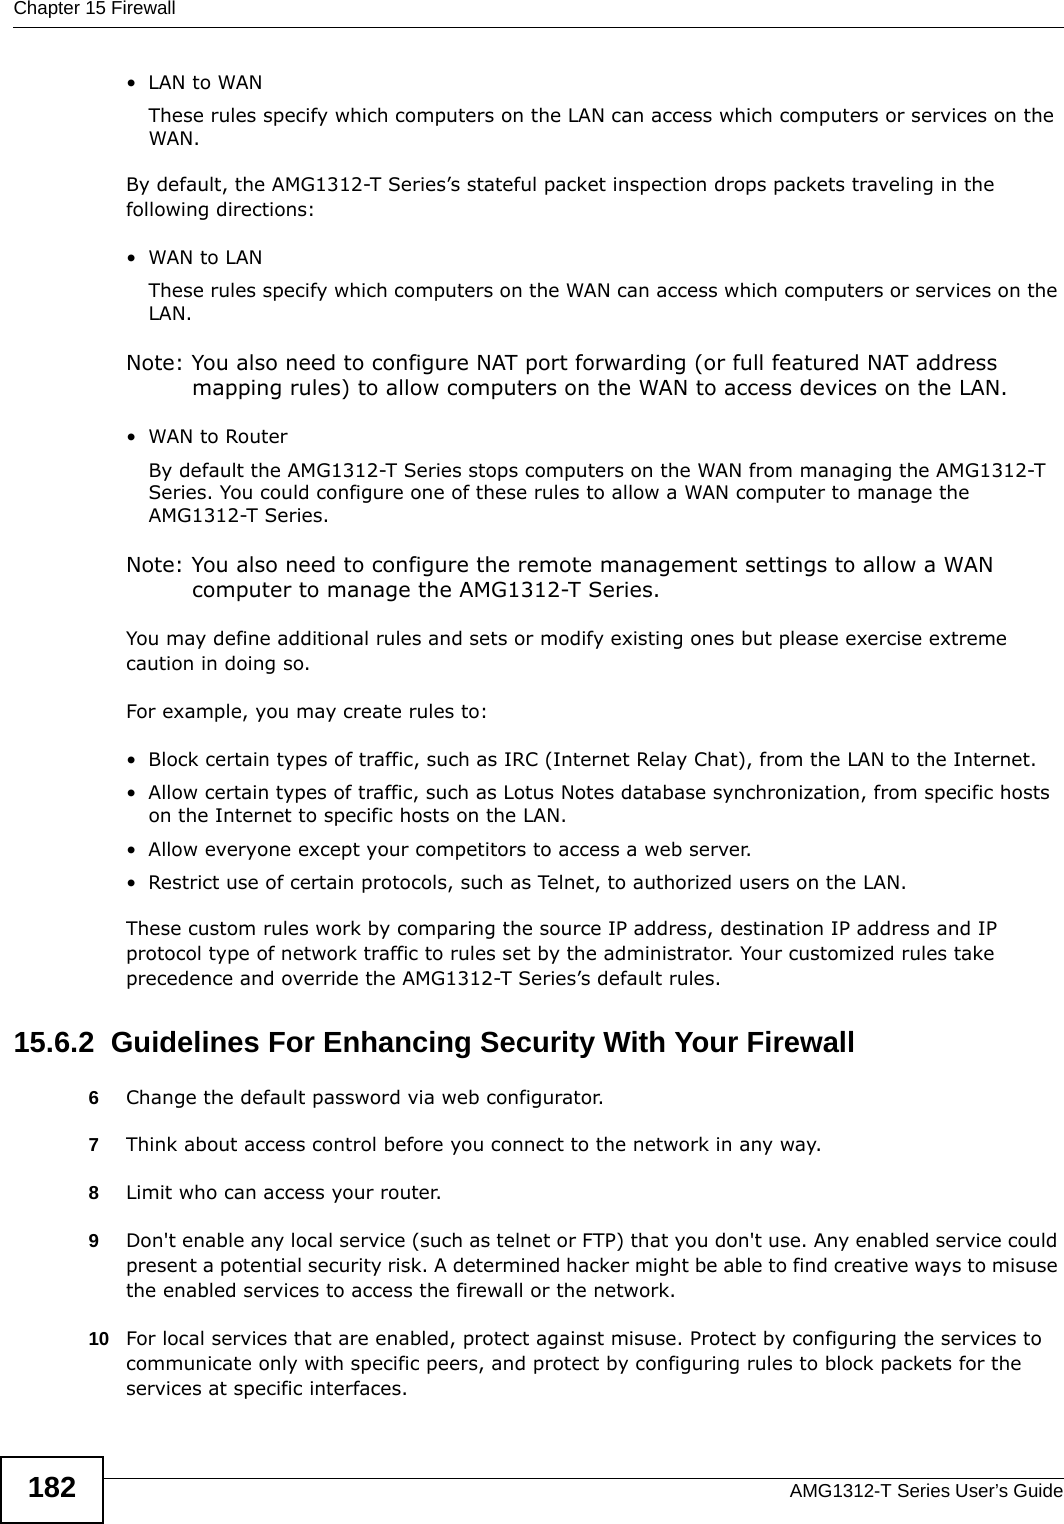 Chapter 15 FirewallAMG1312-T Series User’s Guide182•LAN to WANThese rules specify which computers on the LAN can access which computers or services on the WAN.By default, the AMG1312-T Series’s stateful packet inspection drops packets traveling in the following directions:•WAN to LANThese rules specify which computers on the WAN can access which computers or services on the LAN. Note: You also need to configure NAT port forwarding (or full featured NAT address mapping rules) to allow computers on the WAN to access devices on the LAN.•WAN to RouterBy default the AMG1312-T Series stops computers on the WAN from managing the AMG1312-T Series. You could configure one of these rules to allow a WAN computer to manage the AMG1312-T Series.Note: You also need to configure the remote management settings to allow a WAN computer to manage the AMG1312-T Series.You may define additional rules and sets or modify existing ones but please exercise extreme caution in doing so.For example, you may create rules to:• Block certain types of traffic, such as IRC (Internet Relay Chat), from the LAN to the Internet.• Allow certain types of traffic, such as Lotus Notes database synchronization, from specific hosts on the Internet to specific hosts on the LAN.• Allow everyone except your competitors to access a web server.• Restrict use of certain protocols, such as Telnet, to authorized users on the LAN.These custom rules work by comparing the source IP address, destination IP address and IP protocol type of network traffic to rules set by the administrator. Your customized rules take precedence and override the AMG1312-T Series’s default rules. 15.6.2  Guidelines For Enhancing Security With Your Firewall6Change the default password via web configurator.7Think about access control before you connect to the network in any way.8Limit who can access your router.9Don&apos;t enable any local service (such as telnet or FTP) that you don&apos;t use. Any enabled service could present a potential security risk. A determined hacker might be able to find creative ways to misuse the enabled services to access the firewall or the network.10 For local services that are enabled, protect against misuse. Protect by configuring the services to communicate only with specific peers, and protect by configuring rules to block packets for the services at specific interfaces.